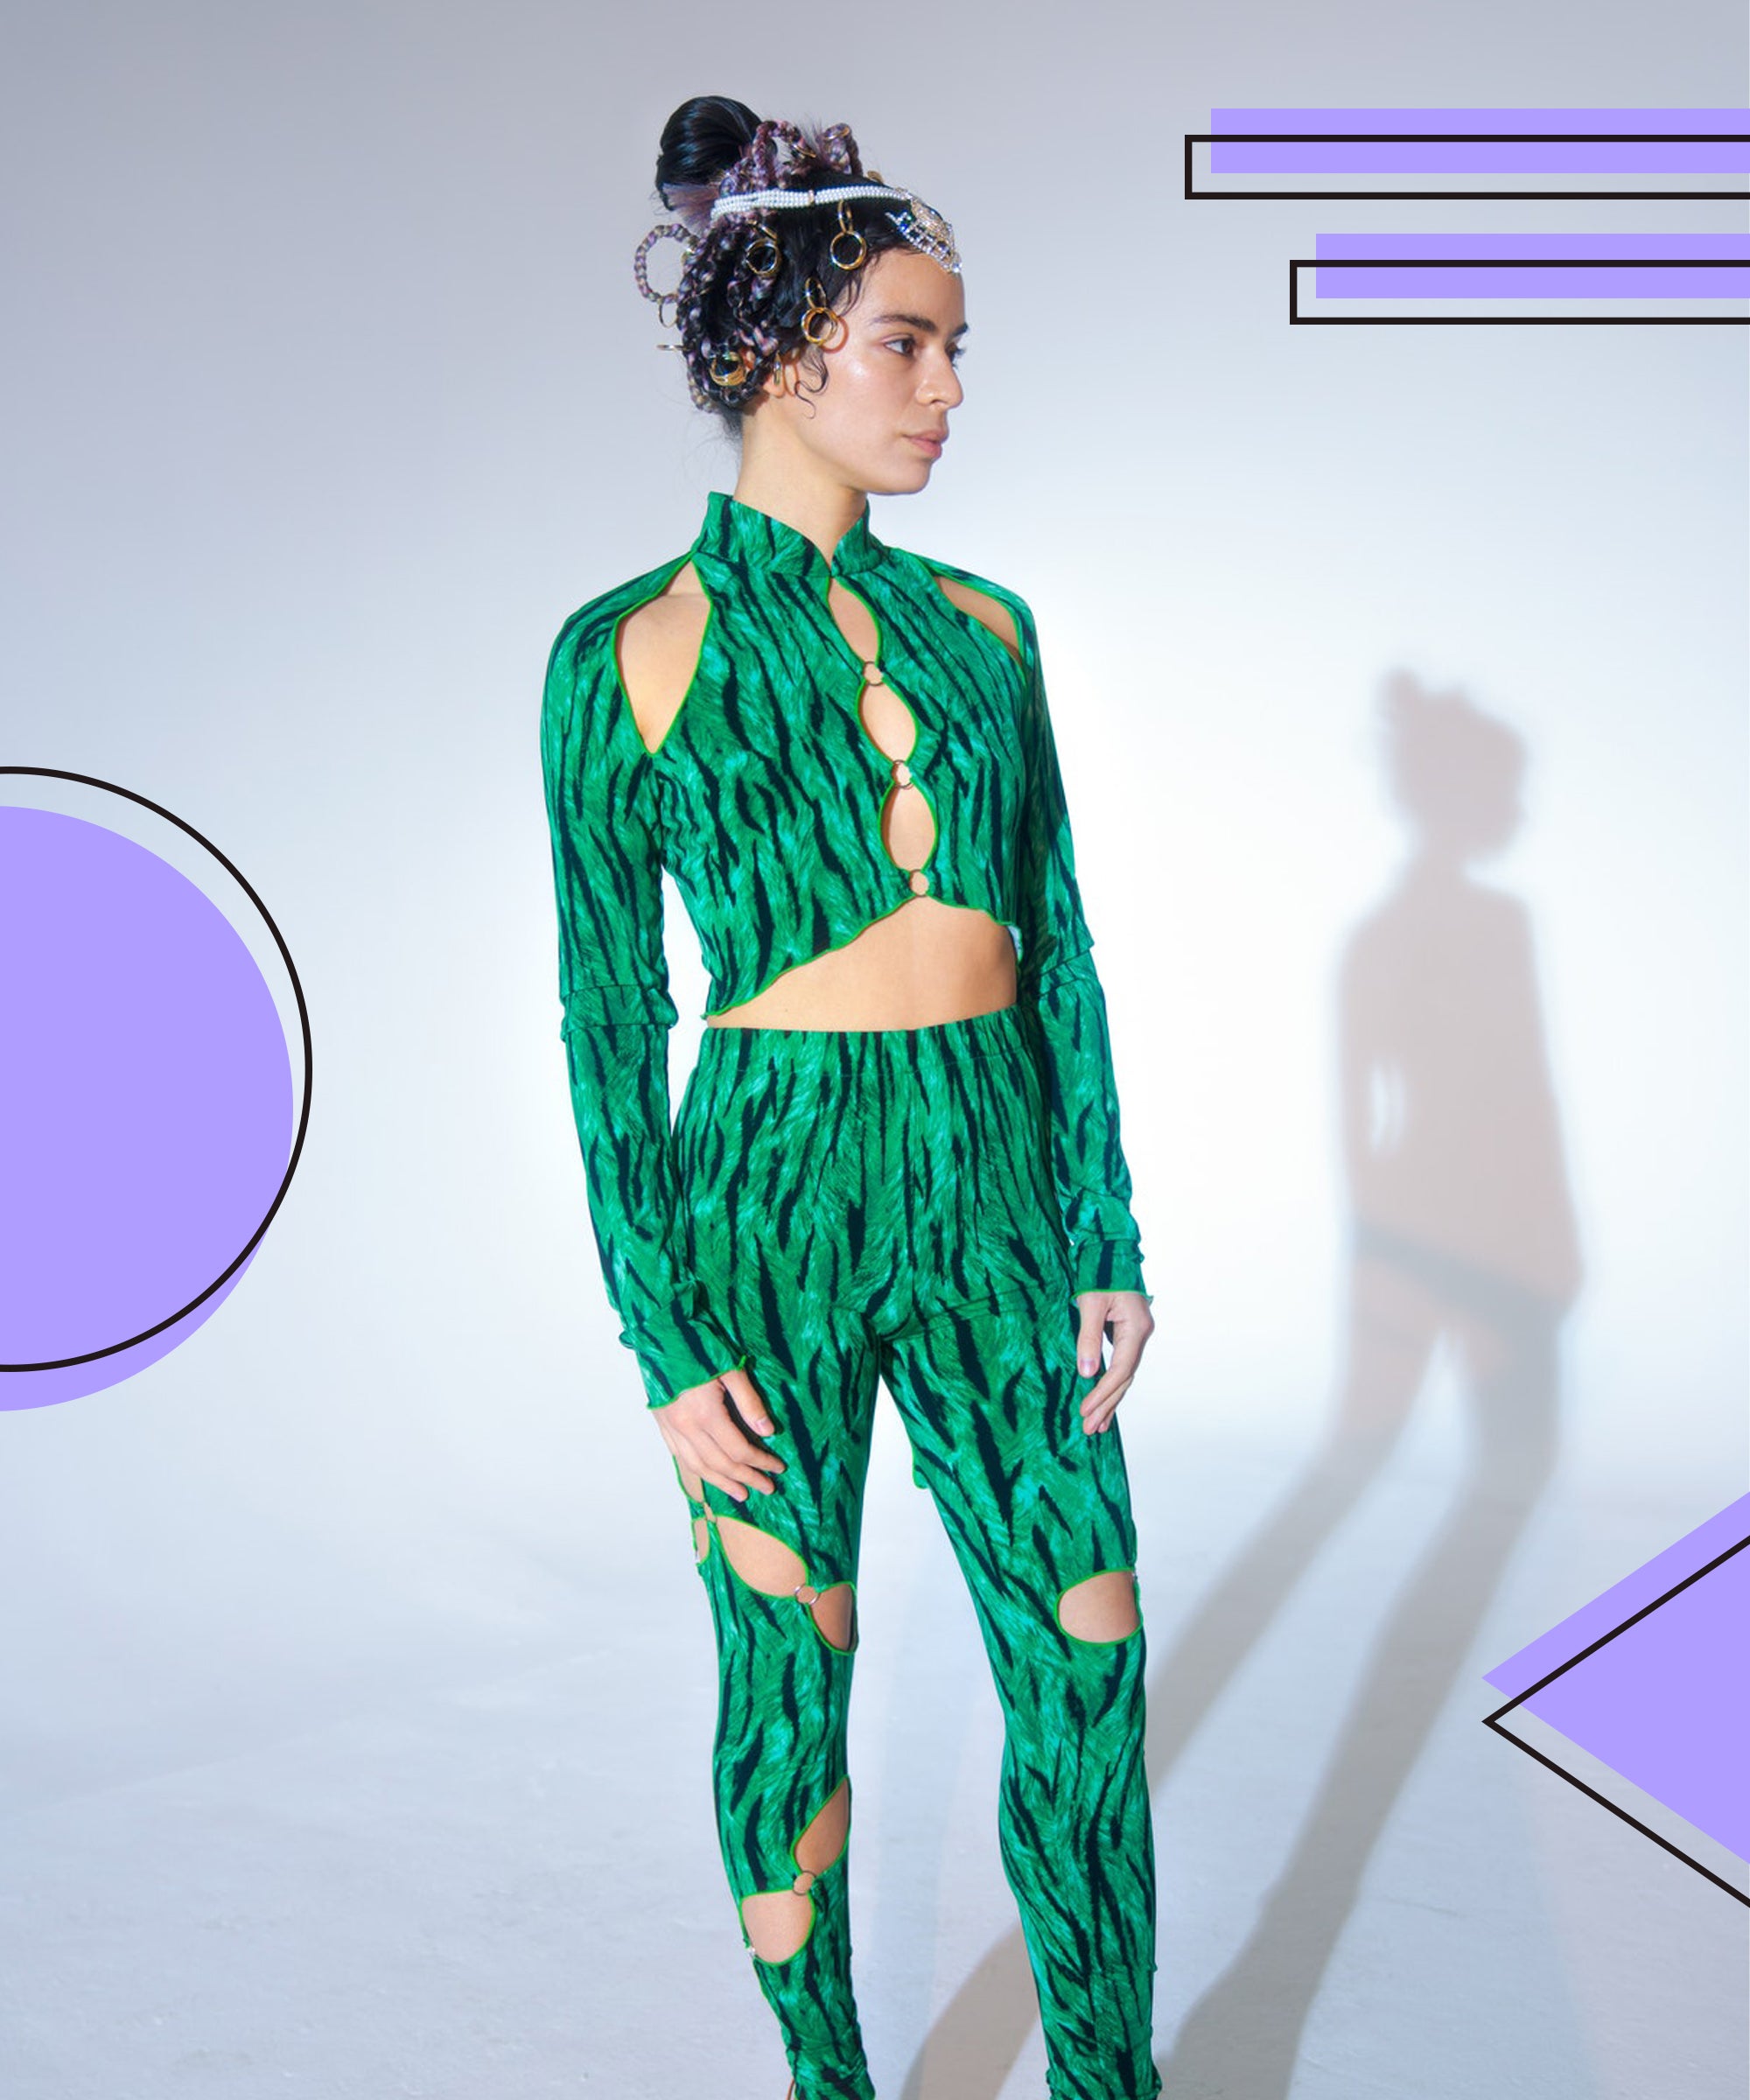 Cutouts and Clothes With Holes in Them Is the Latest Fashion Trend of 2020